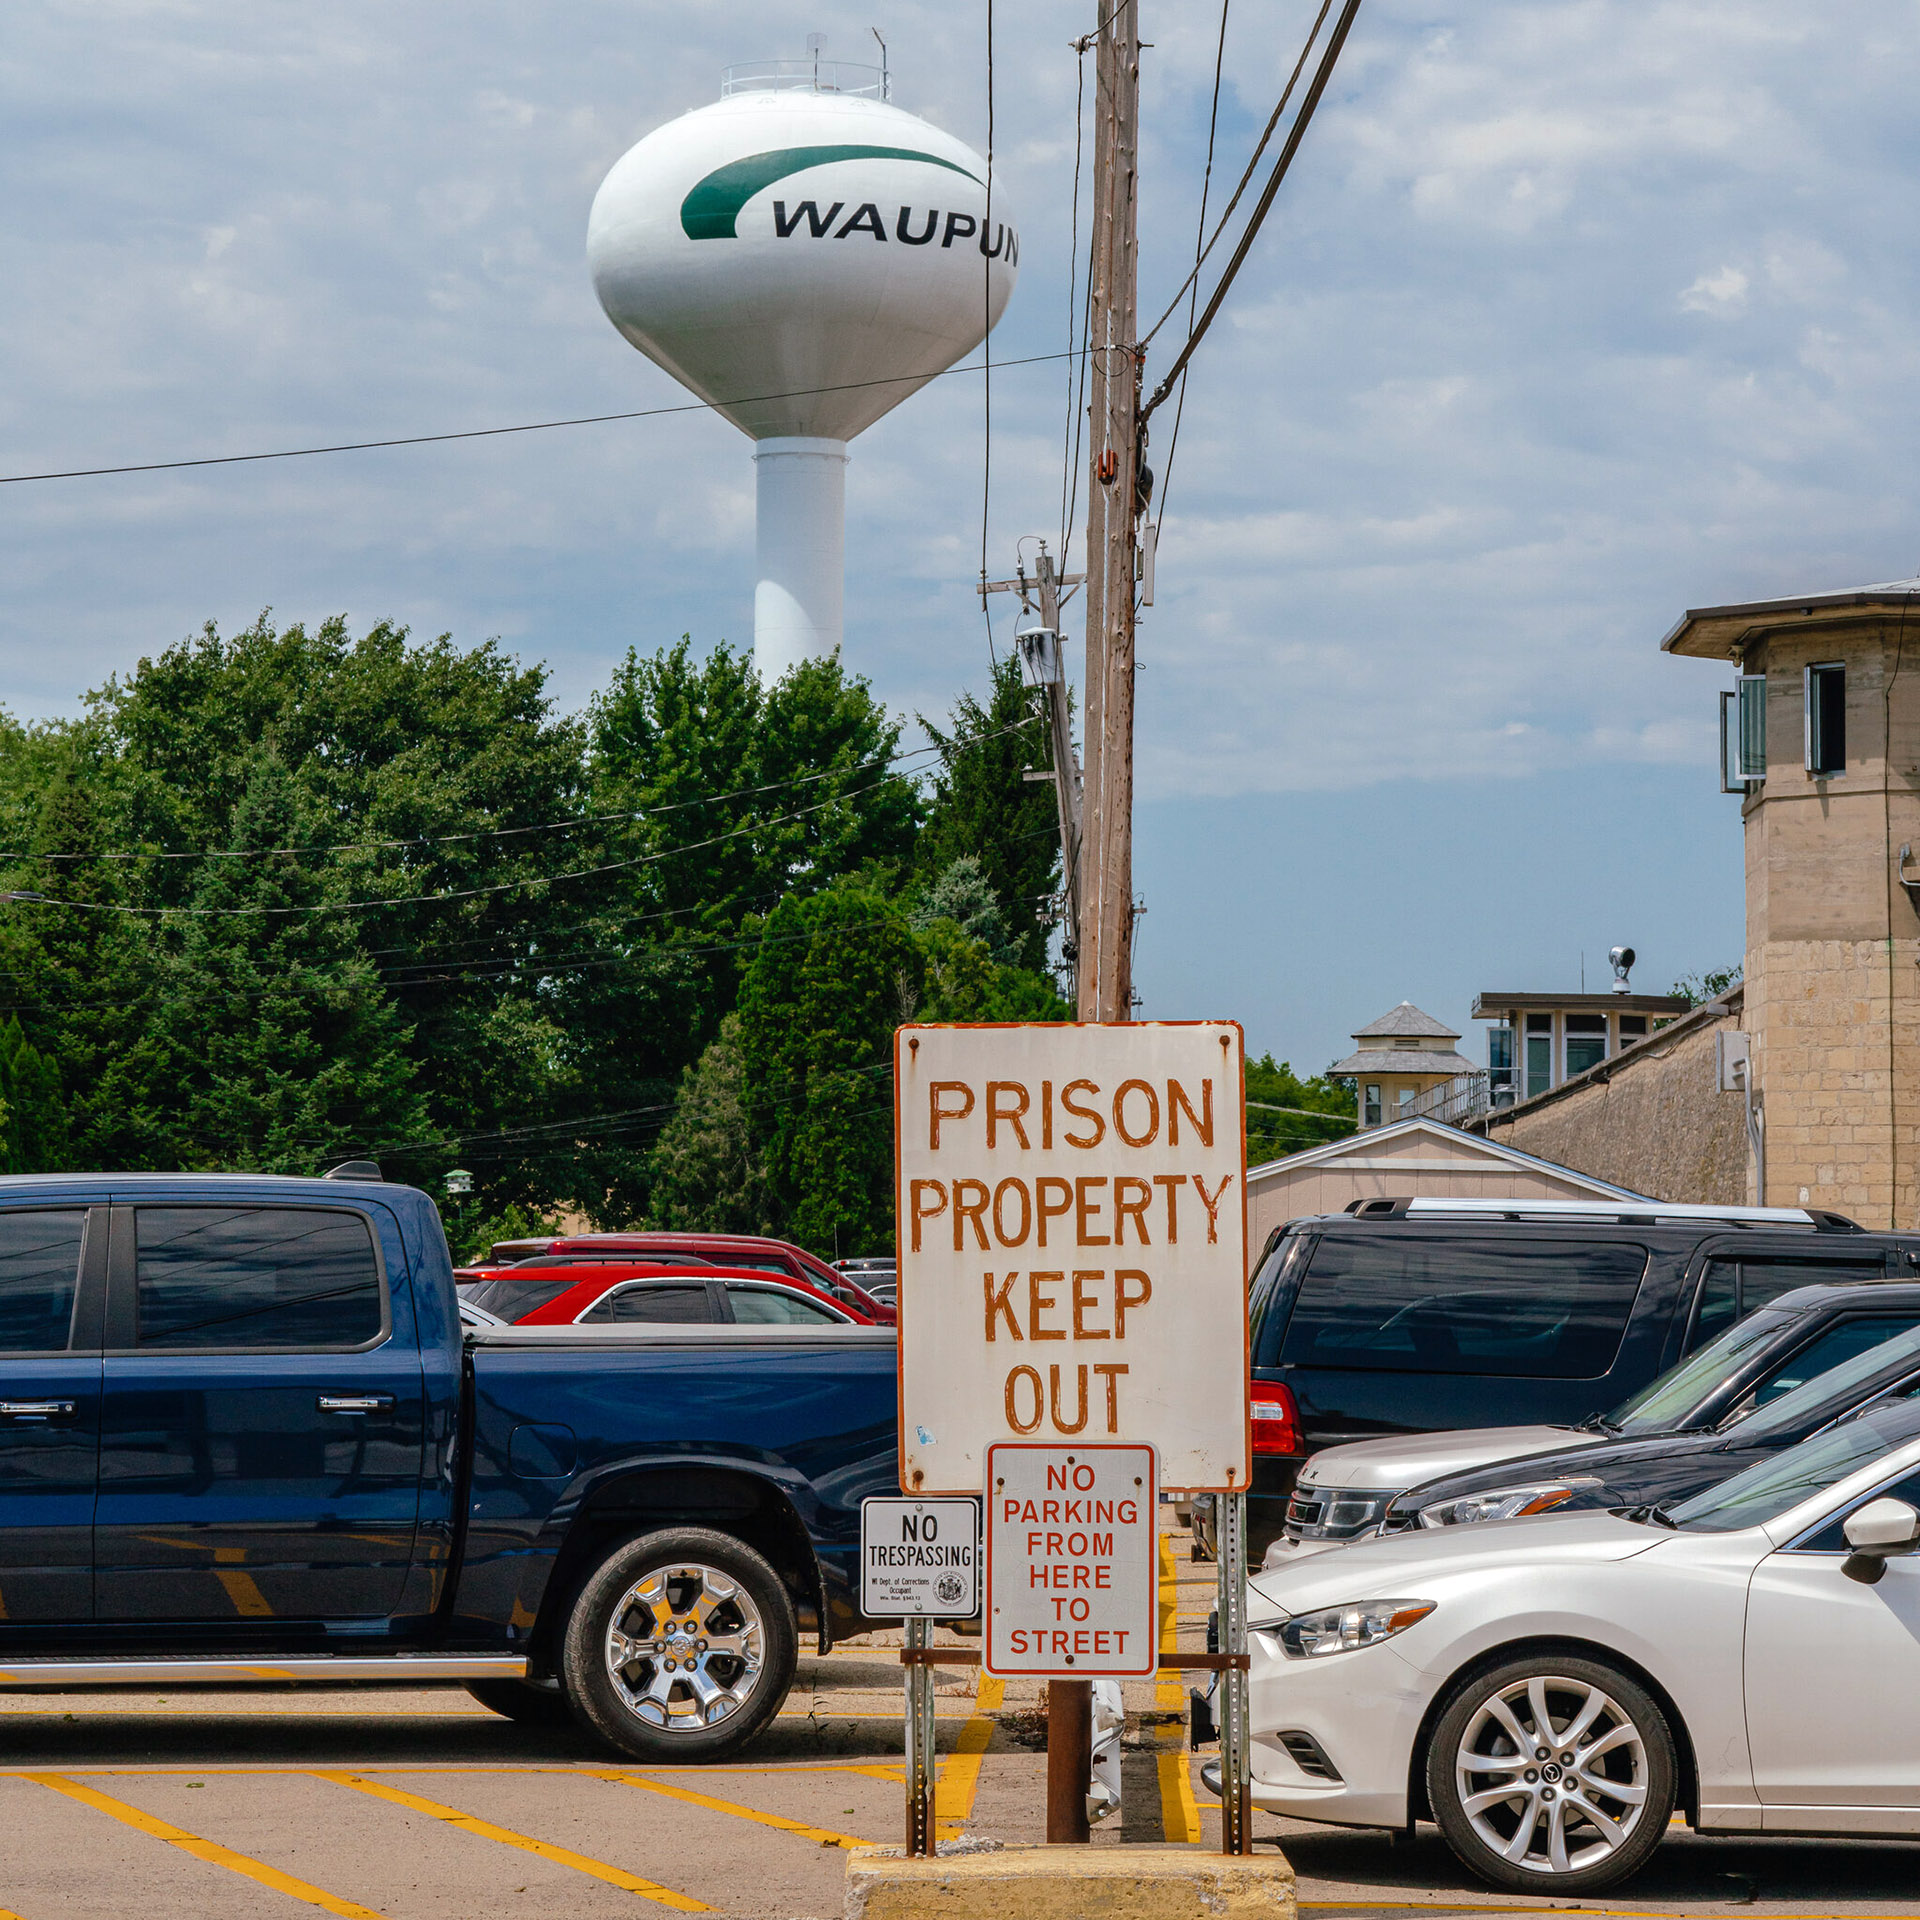 A sign reading "Prison Property Keep Out" stands in parking lot amid parked vehicles, with a utility poll, trees, building and water tower with a painted label reading "Waupun" in the background.